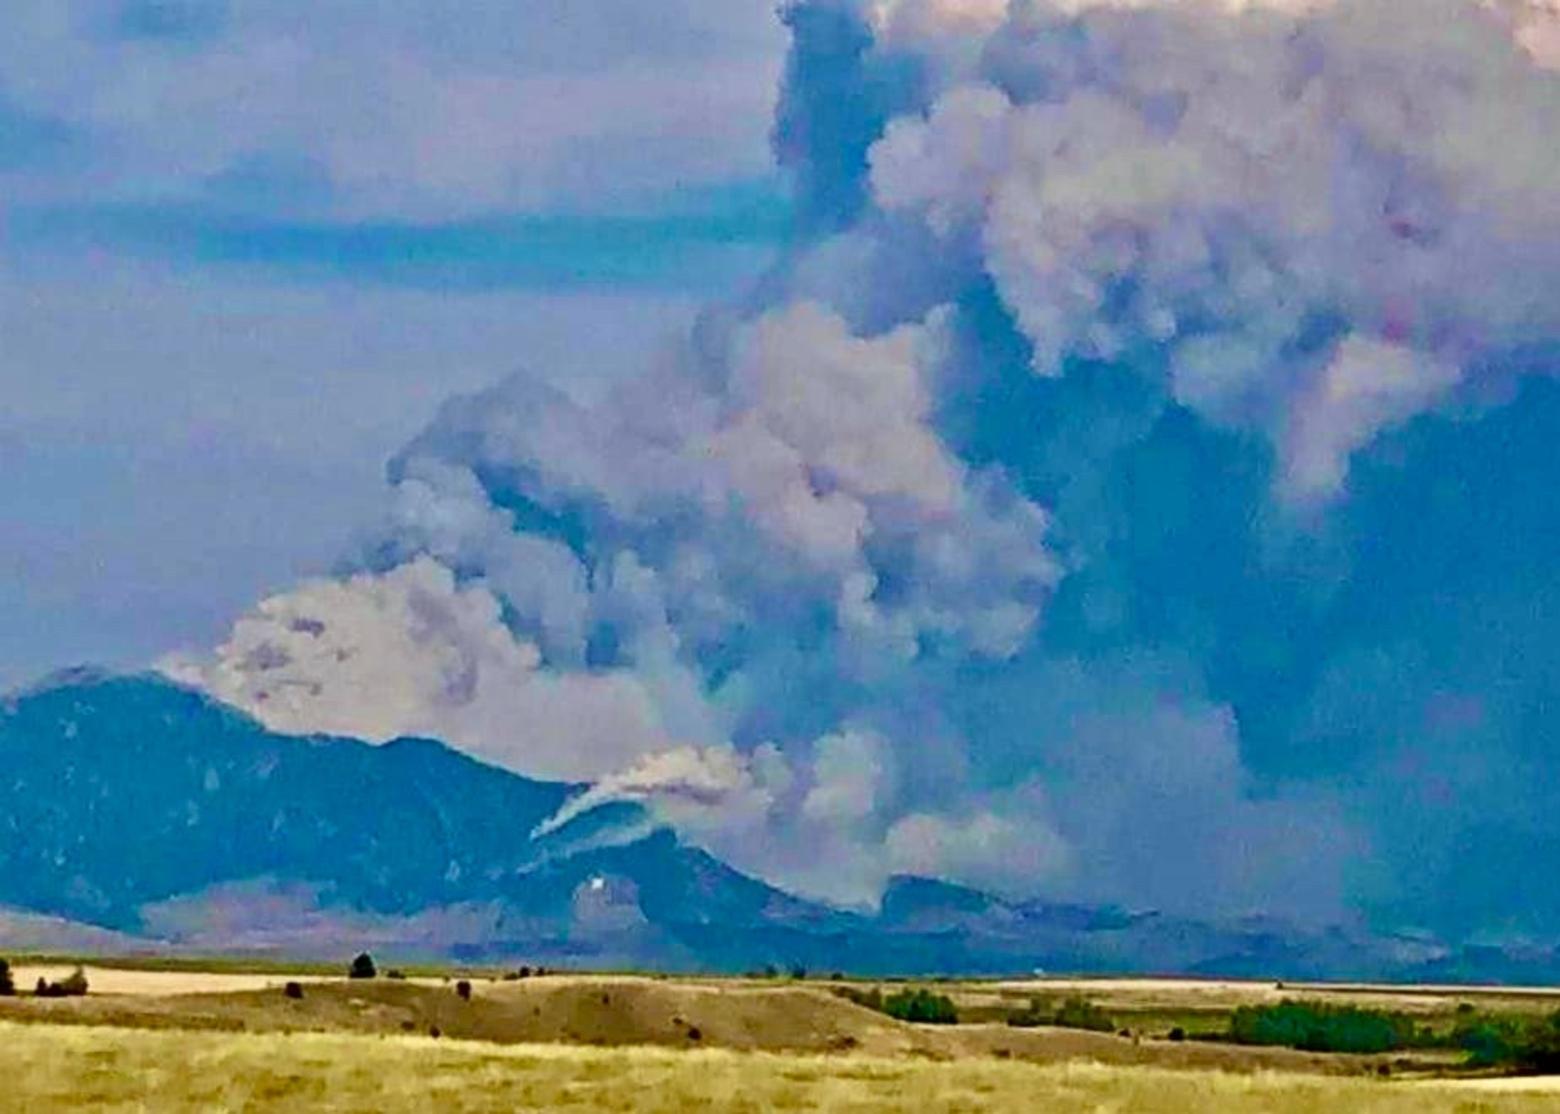 Can't happen here? Over Labor Day weekend 2020, the Bridger Foothills Fire started on the edge of Bozeman, swept up and over the crest of the Bridger Mountains then descended on the other side, destroying 68 structures, including 30 homes in a WUI area of Bridger Canyon. Photo courtesy Rob Sisson